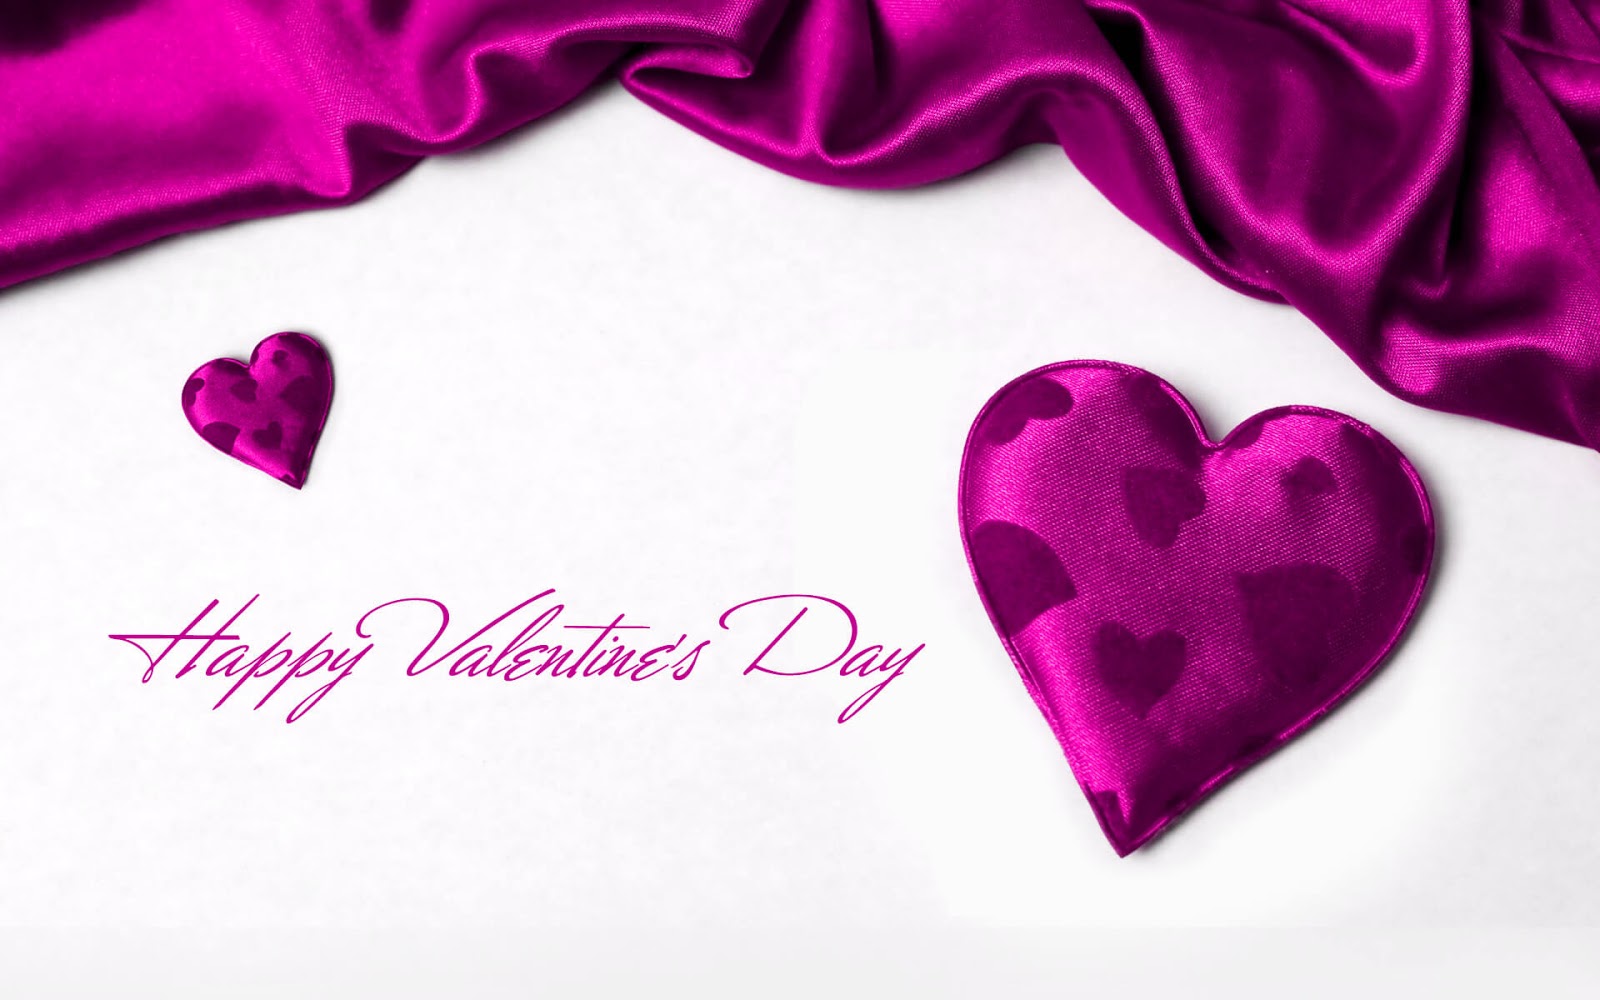 Happy Valentines Day HD Wallpaper Image Wishes Messages Quote Greeting